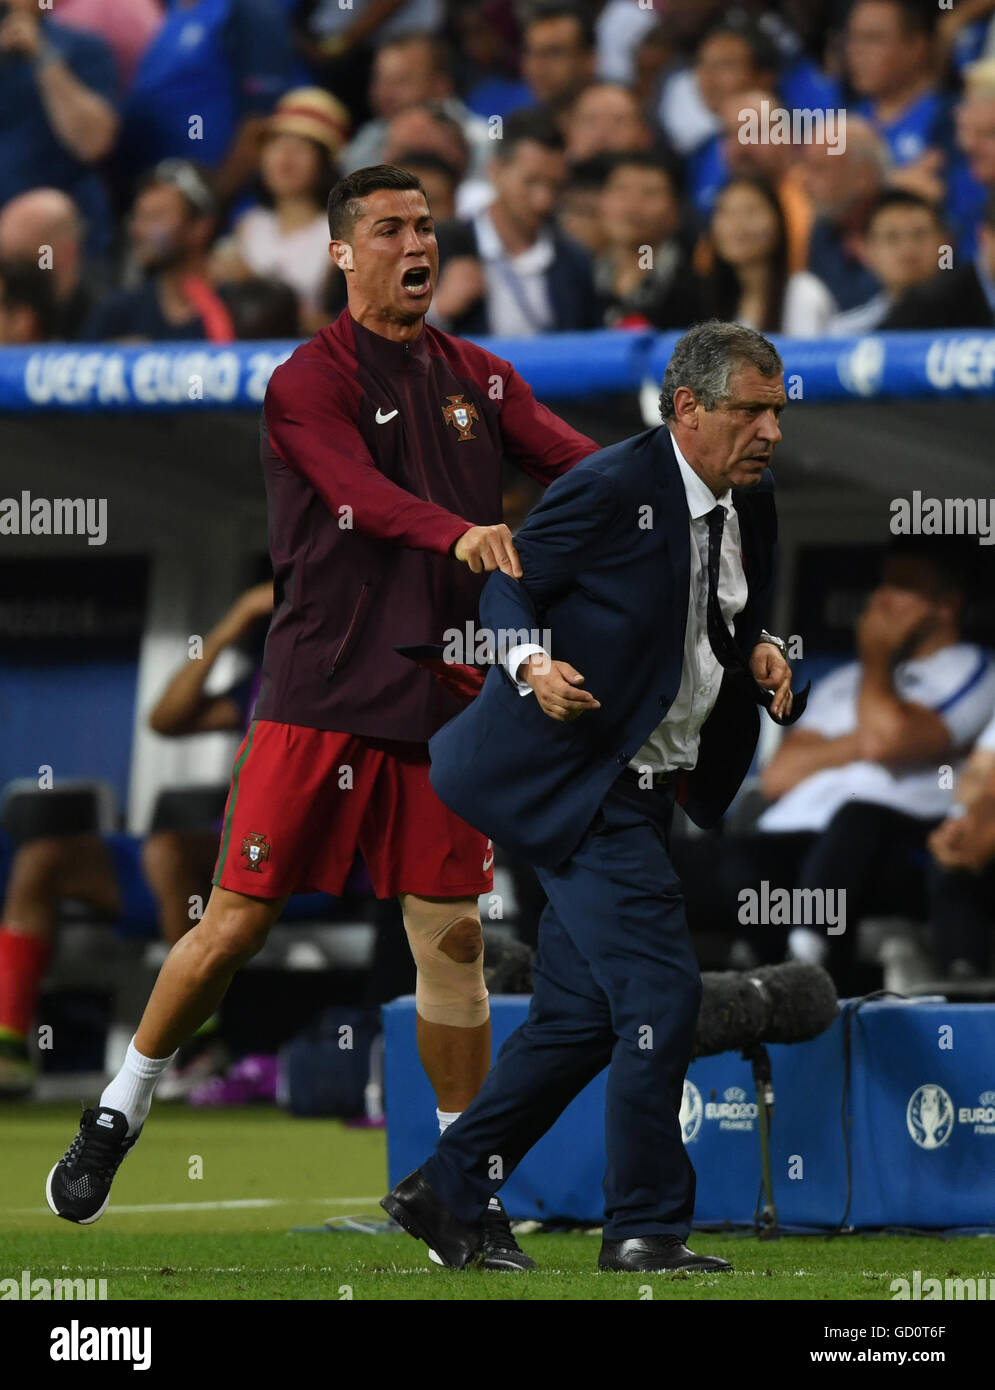 Paris, France. 10th July, 2016. Portugal's Cristiano Ronaldo(L) and  Fernando Santos coach of Portugal react after winning the Euro 2016 final  football match against France in Paris, France, July 10, 2016. Portugal